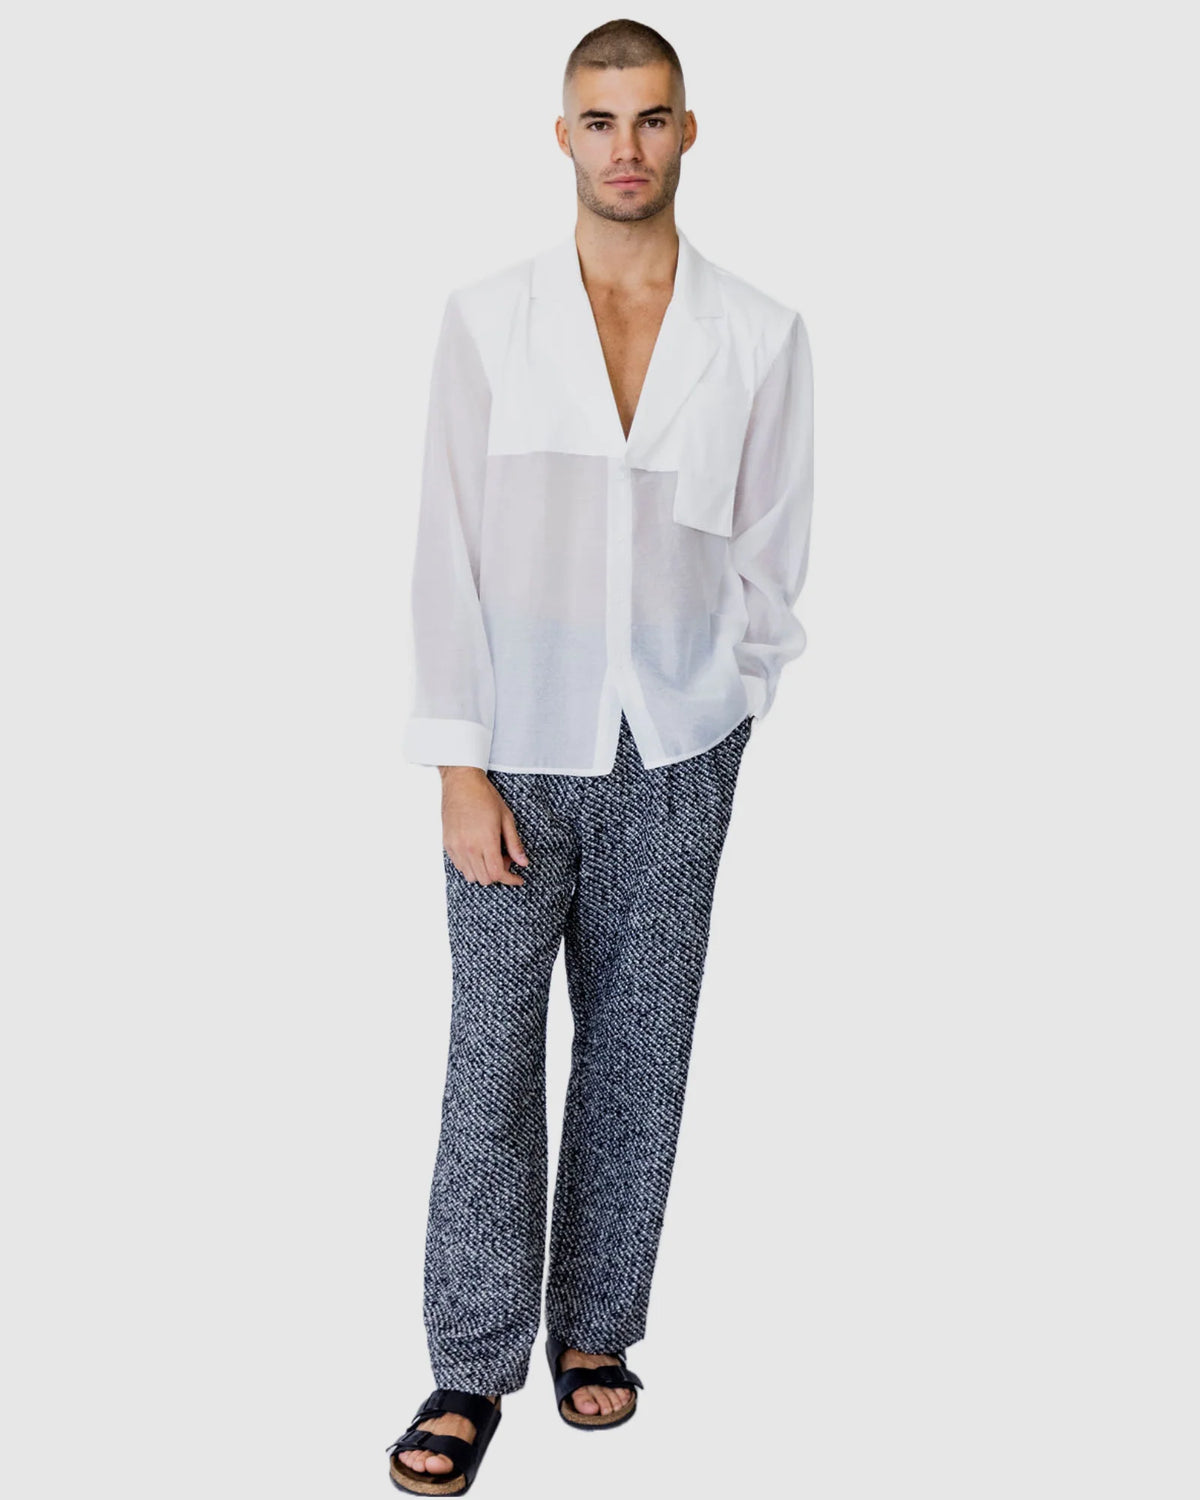 Justin Cassin Isaiah Collared Sheer Shirt in White Color 2